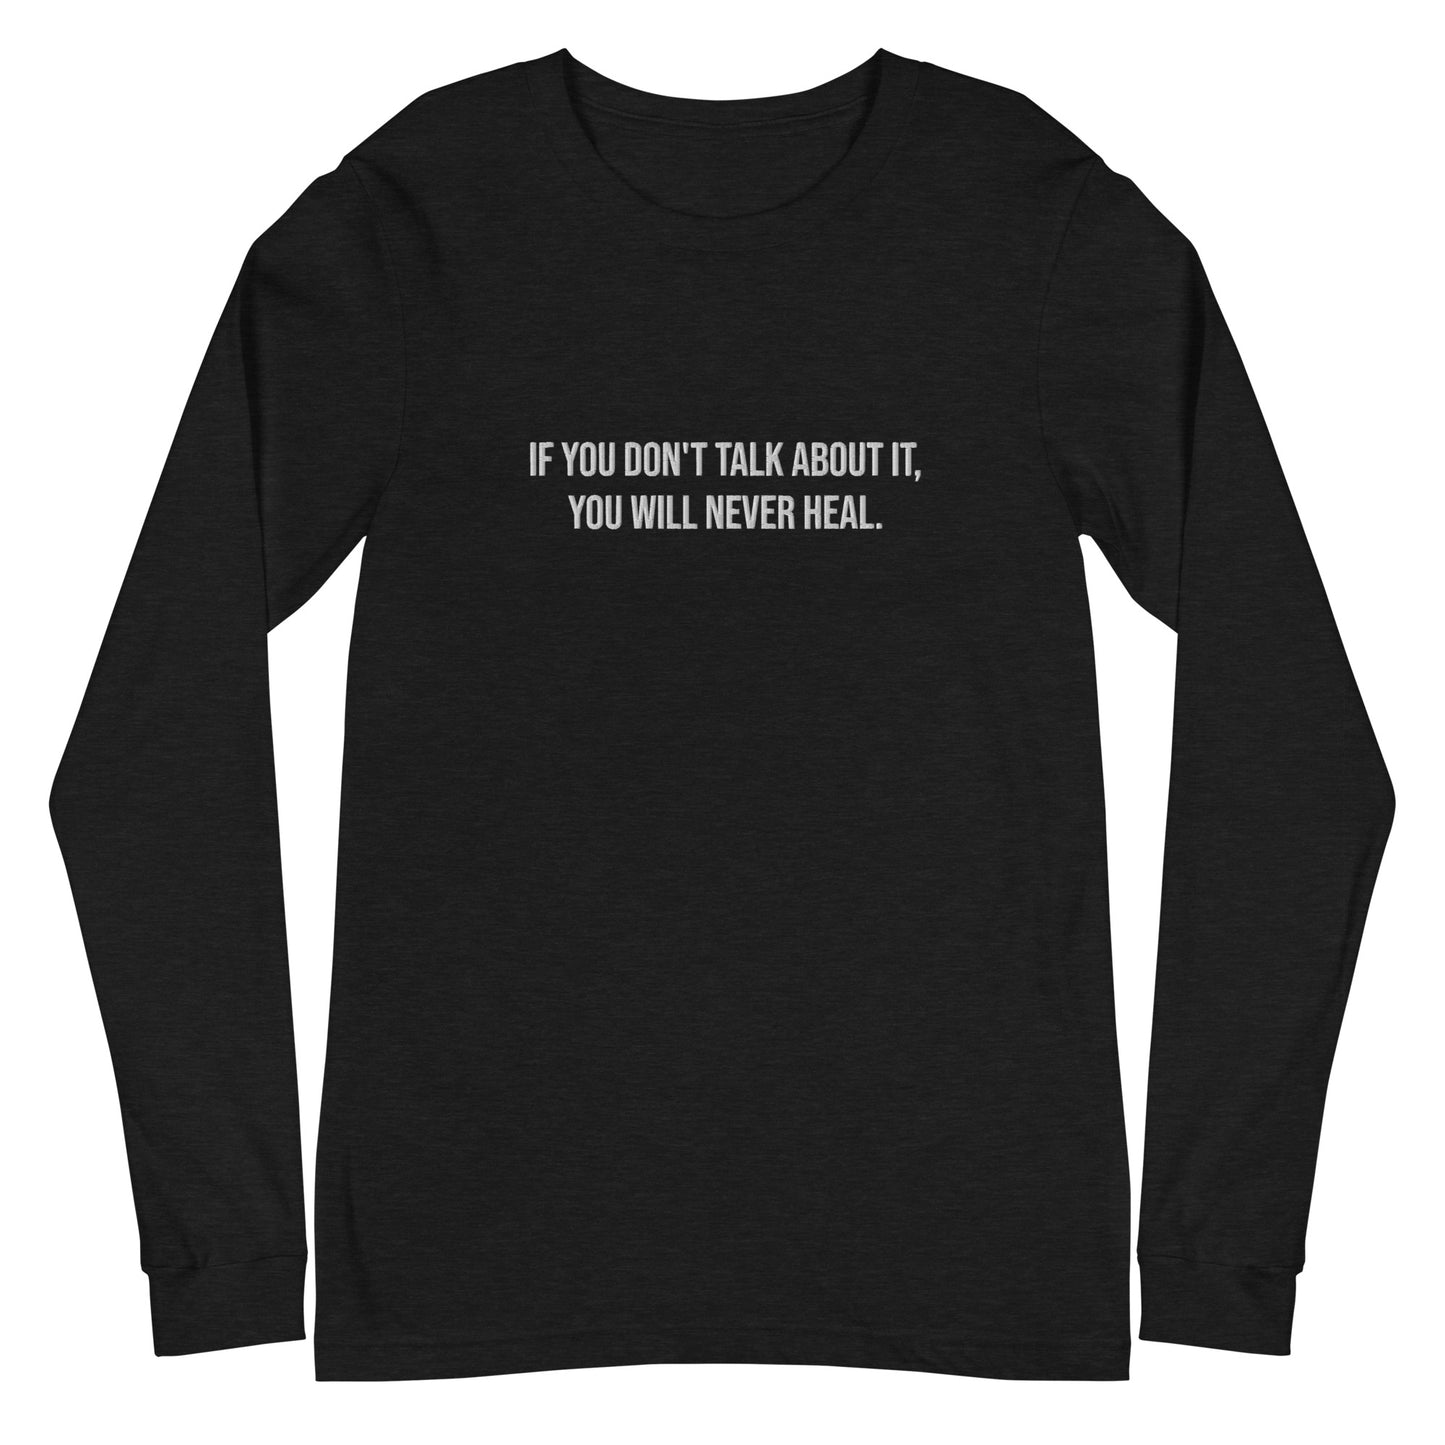 If You Don't Talk About It, You Will Never Heal Embroidered Unisex T-Shirt